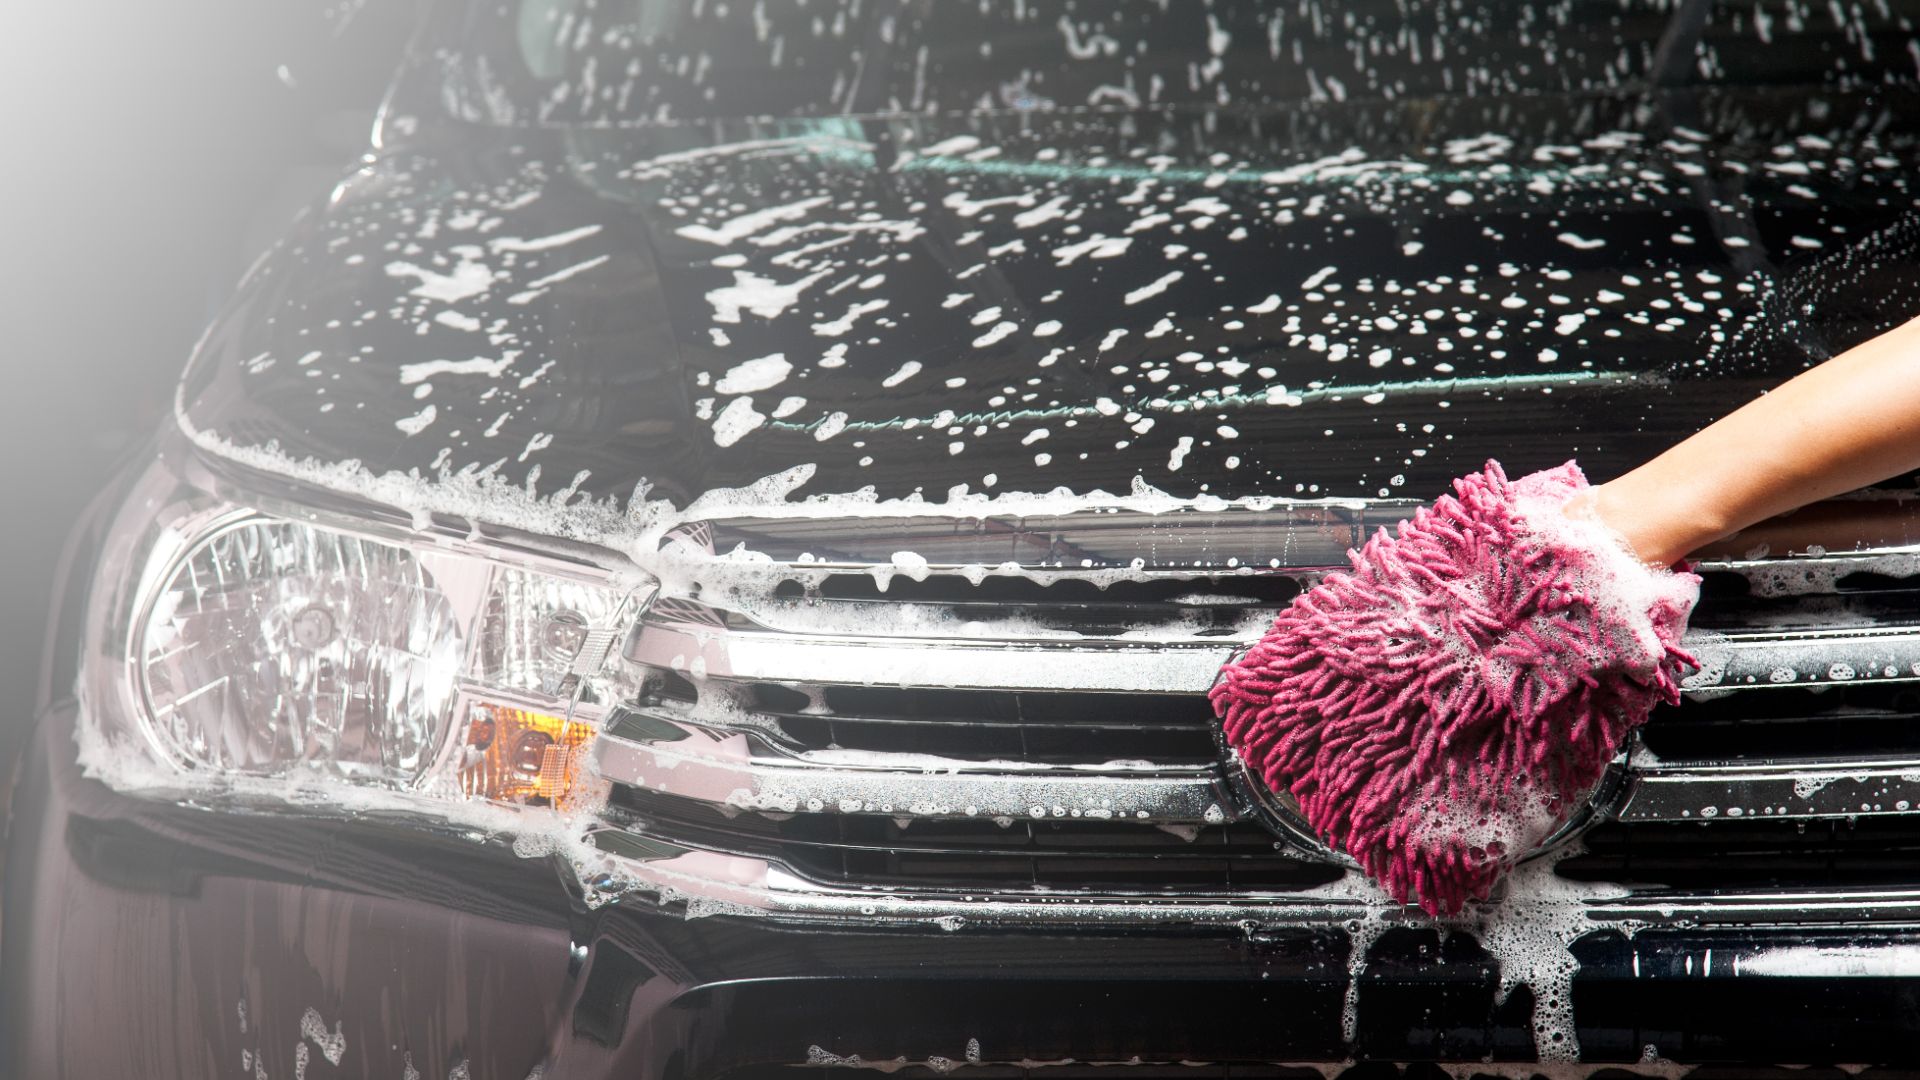 a person with a pink mitt on top of a black car.